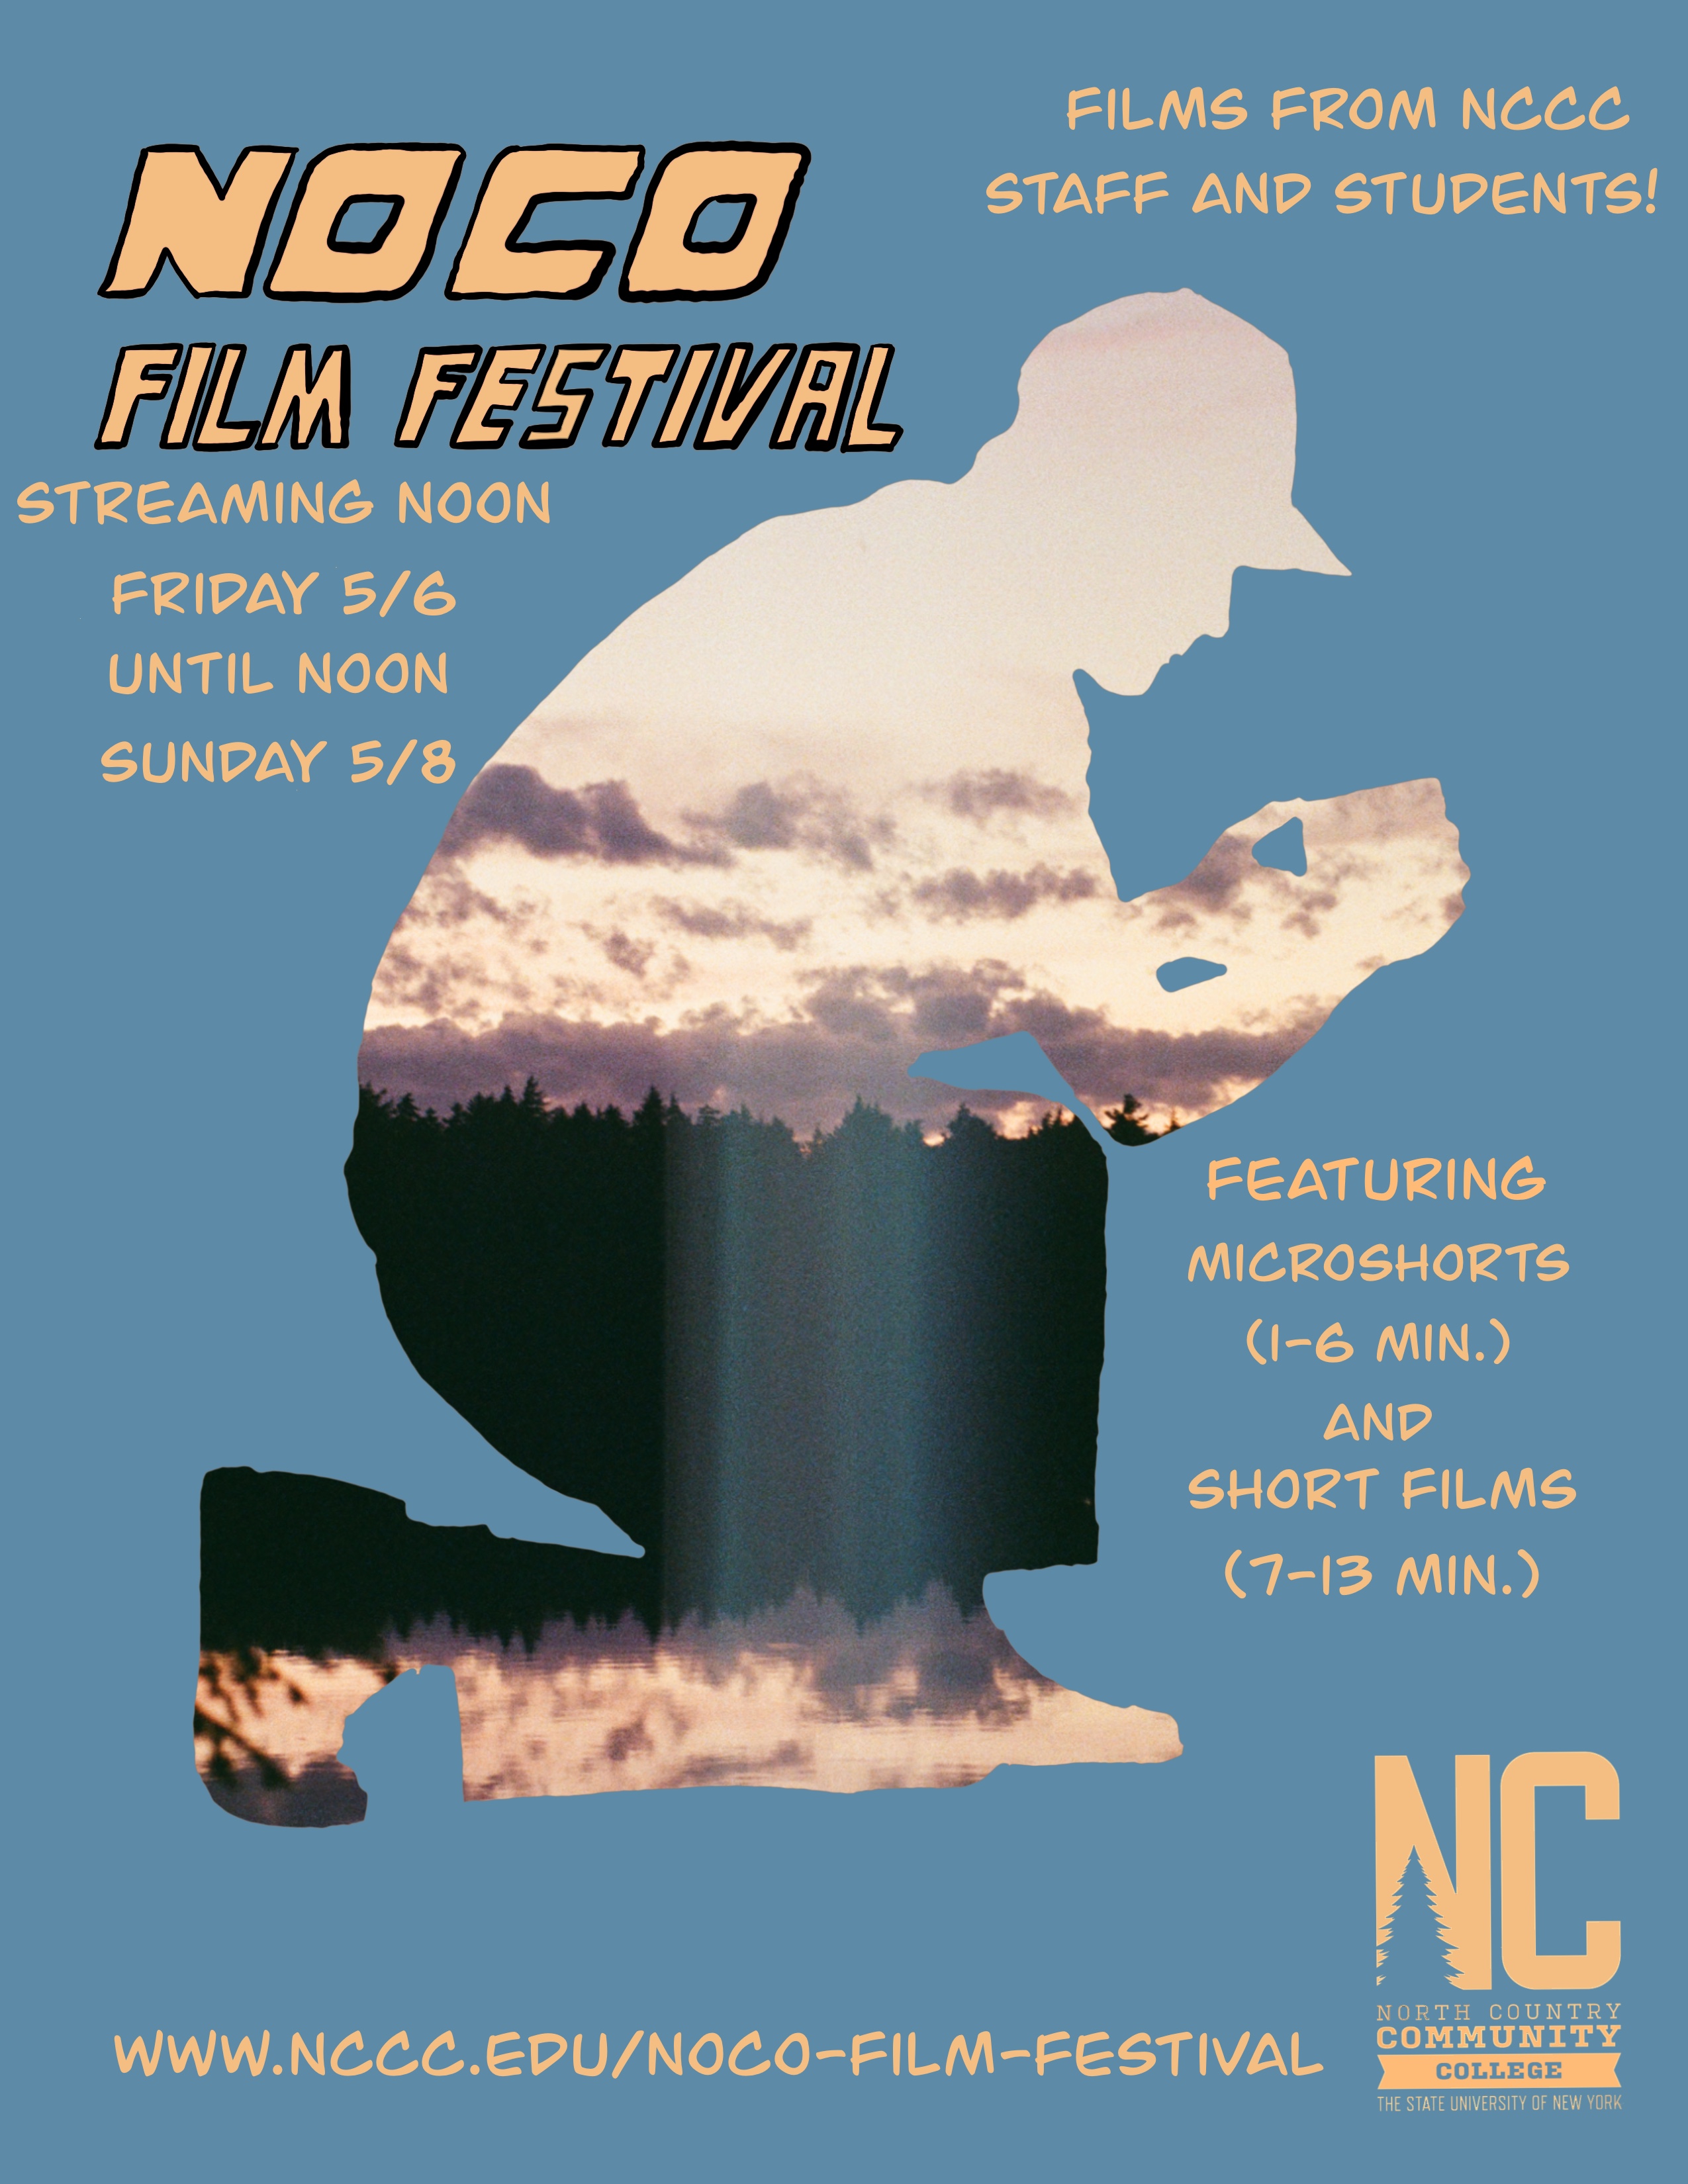 Flyer showing times and information about the NoCo Film Festival